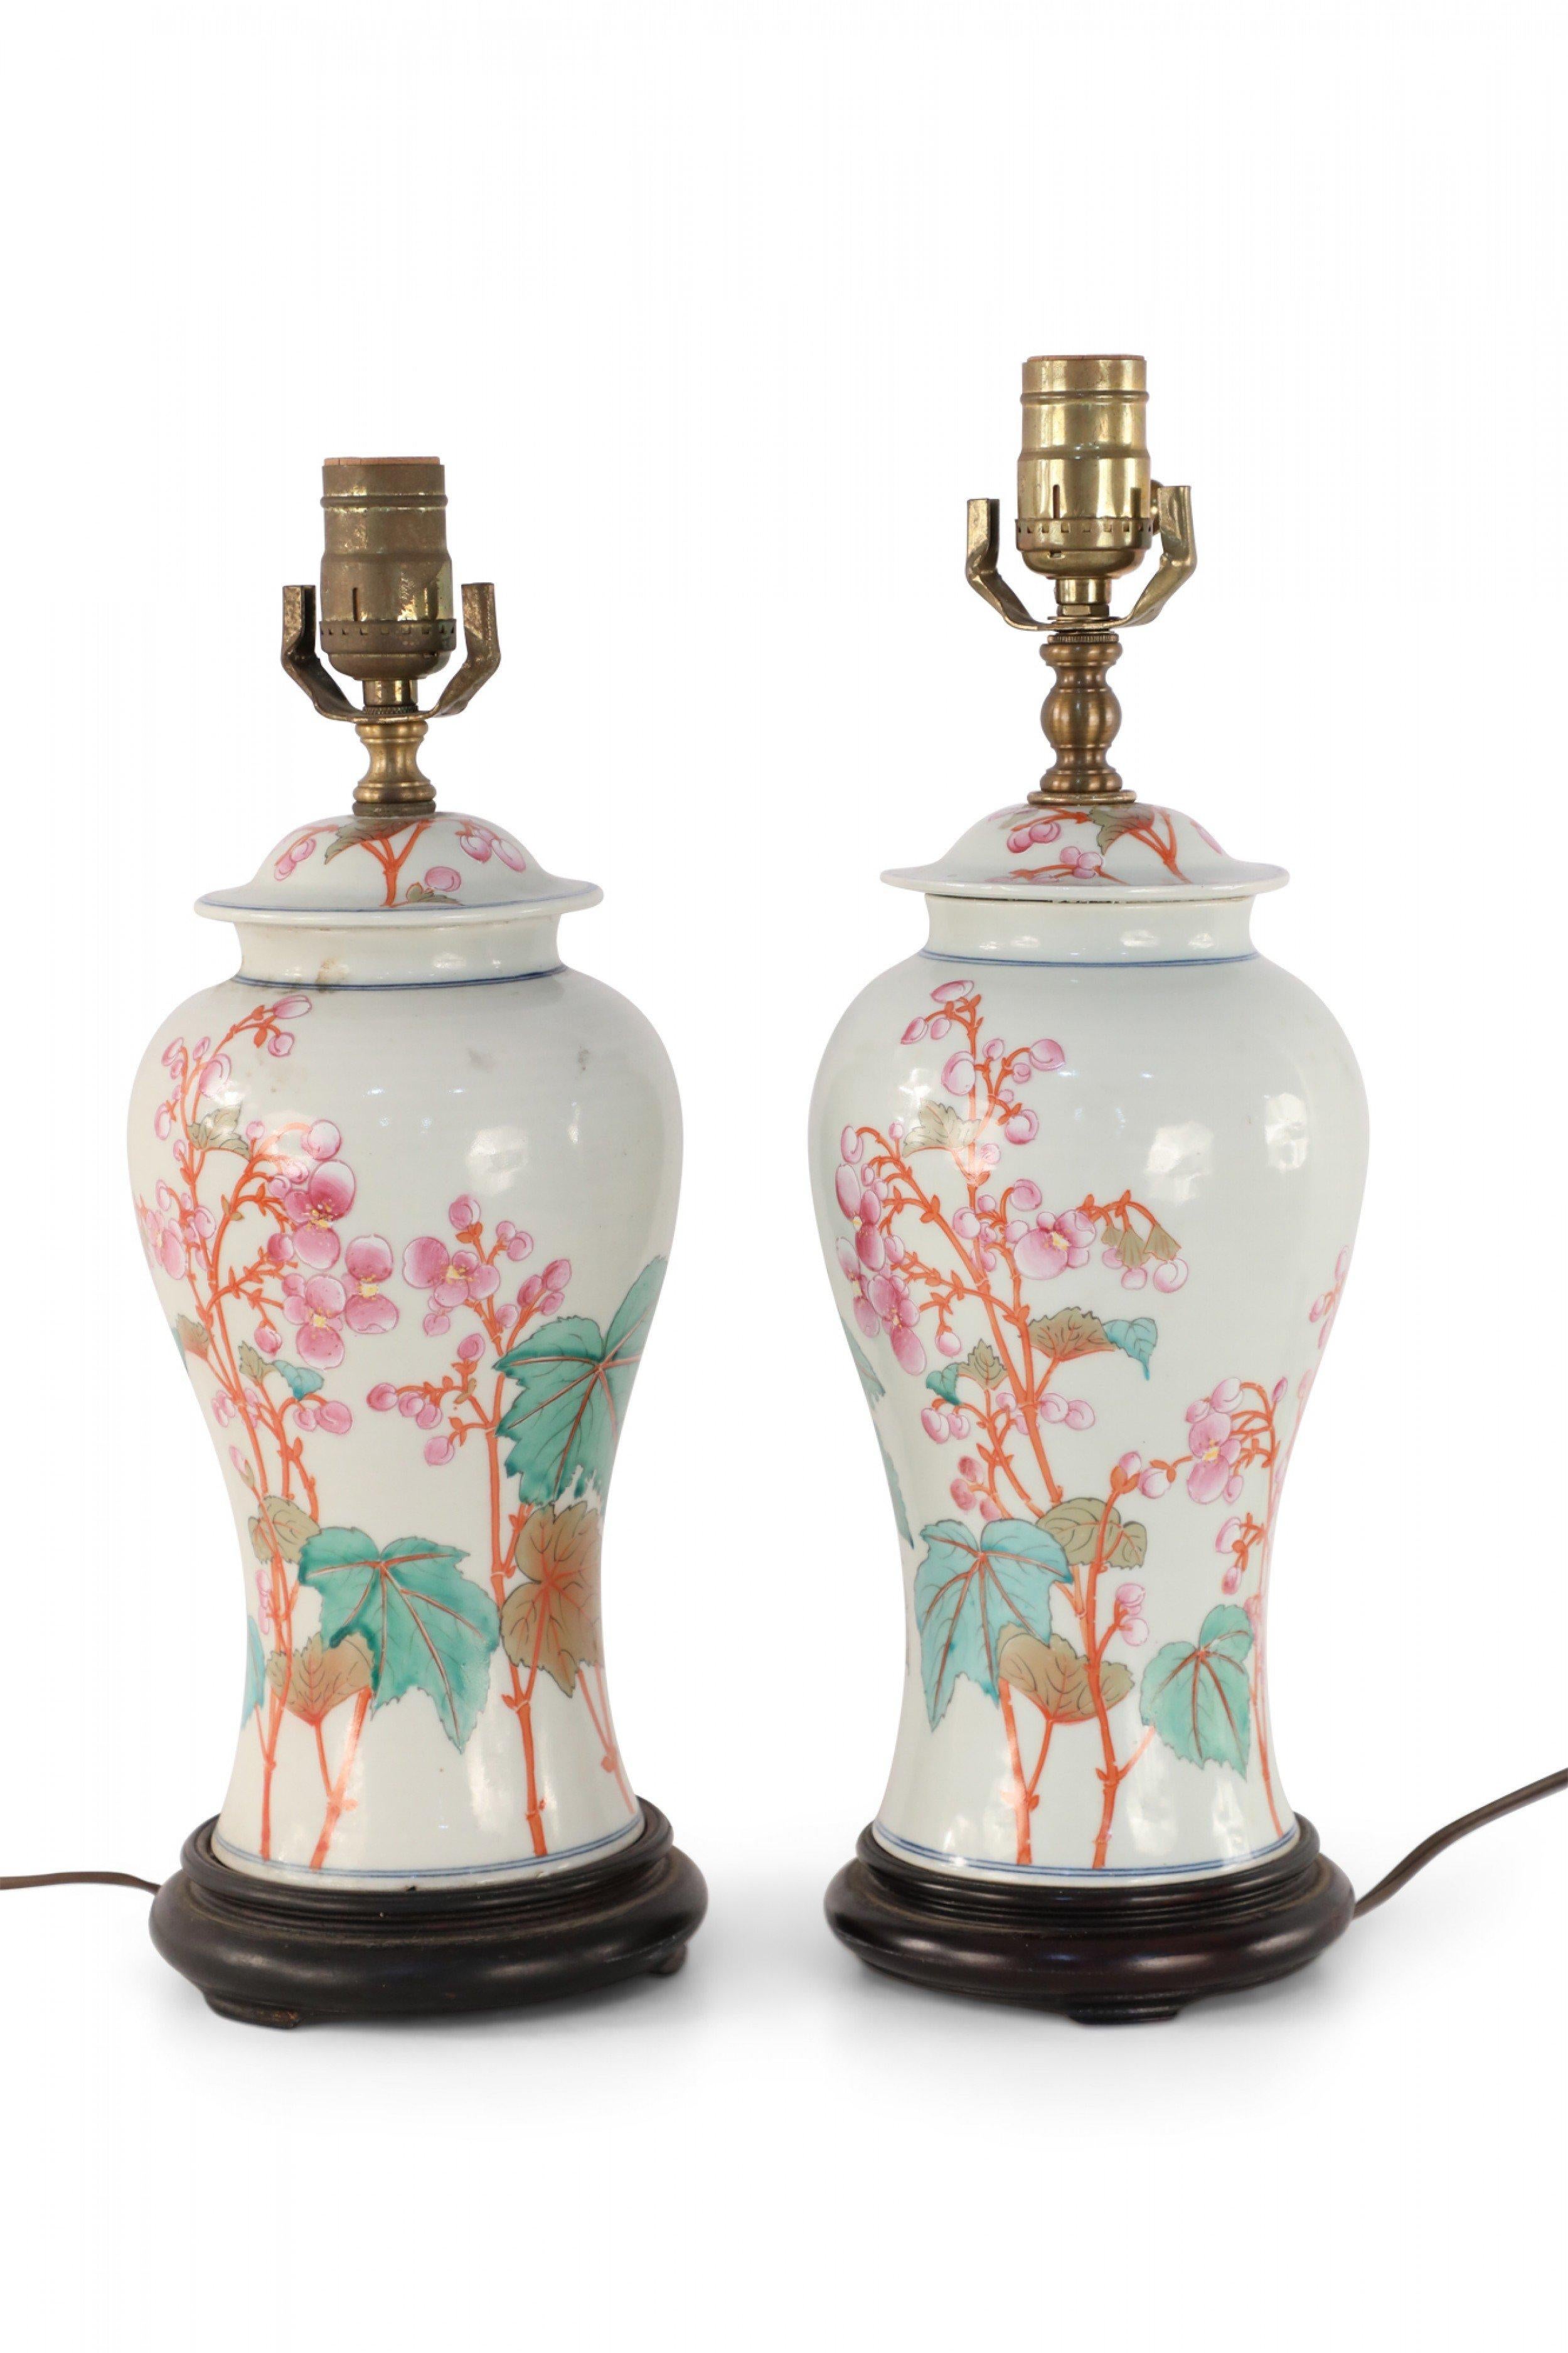 Pair of Chinese Off-White Orange and Pink Floral Motif Porcelain Table Lamps For Sale 1